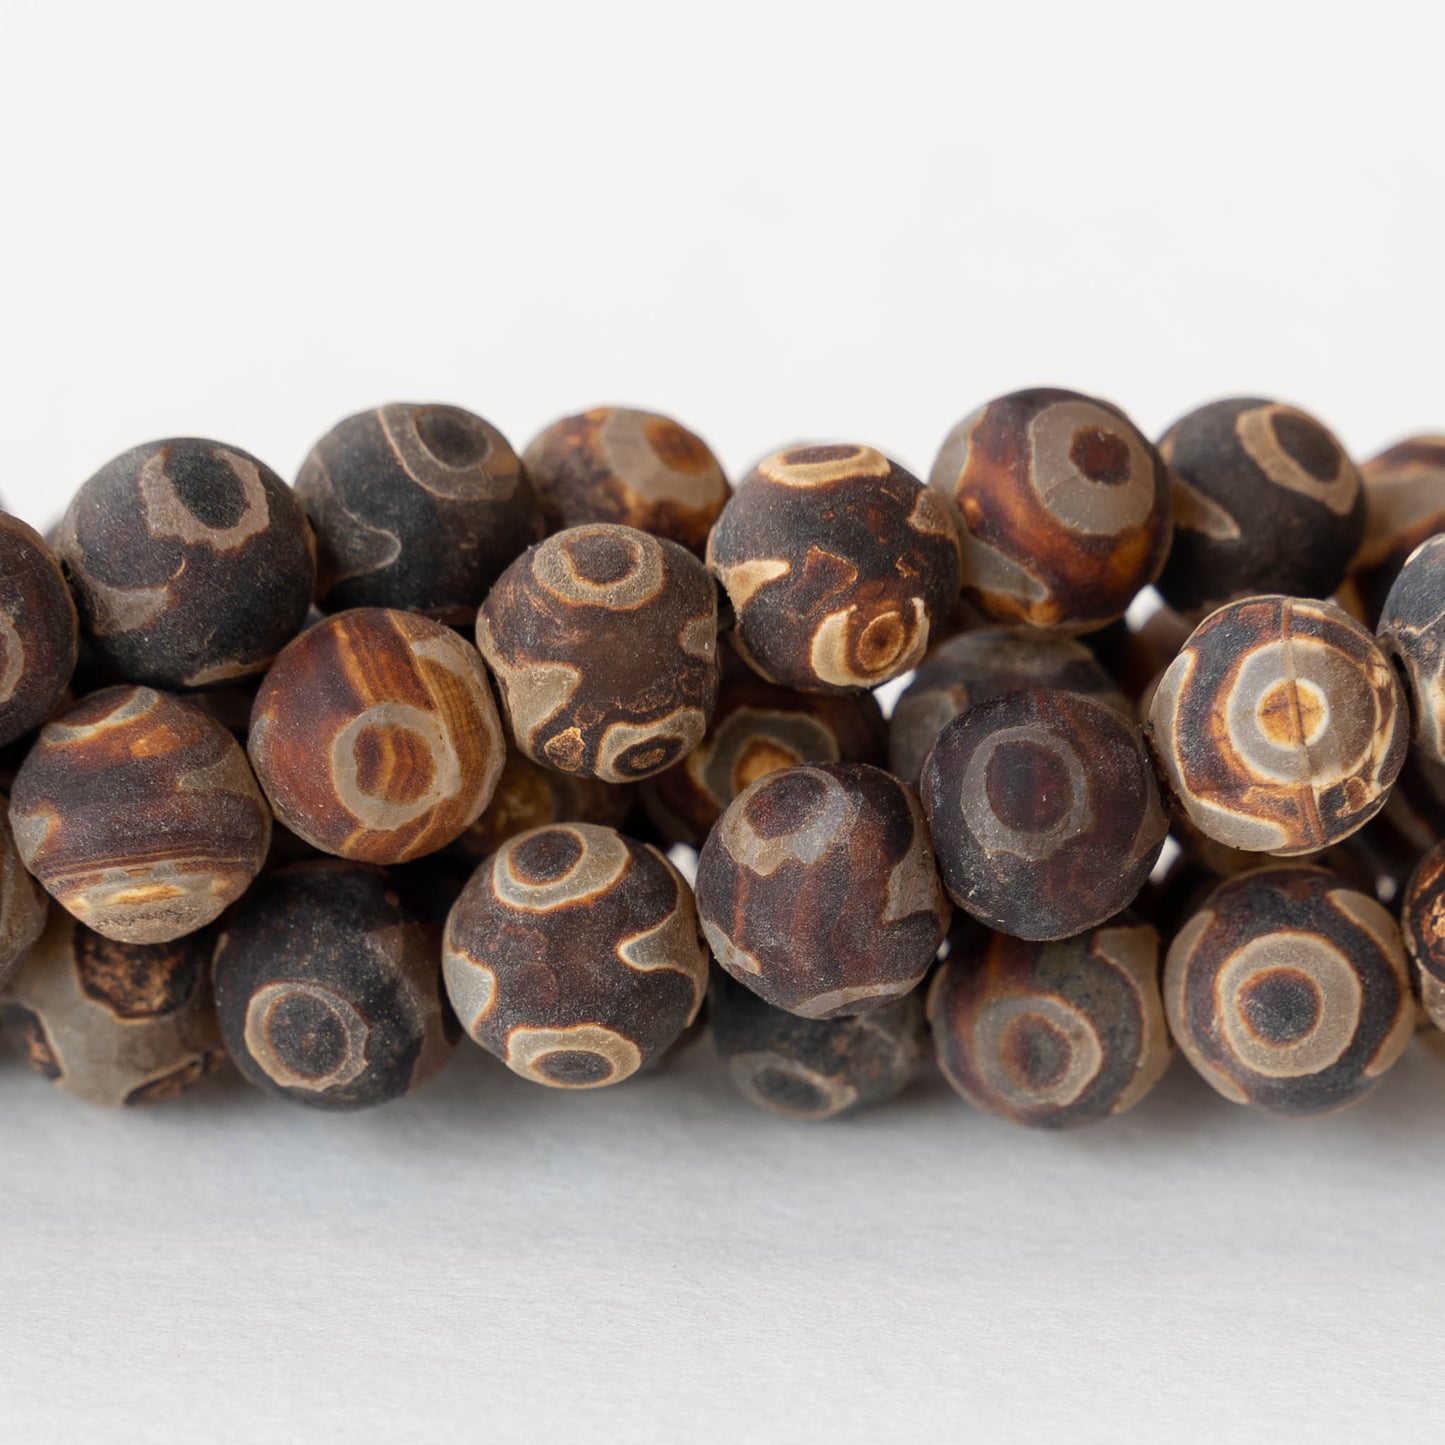 10mm Brown Rustic Tibetan Agate Beads - 16 Inches